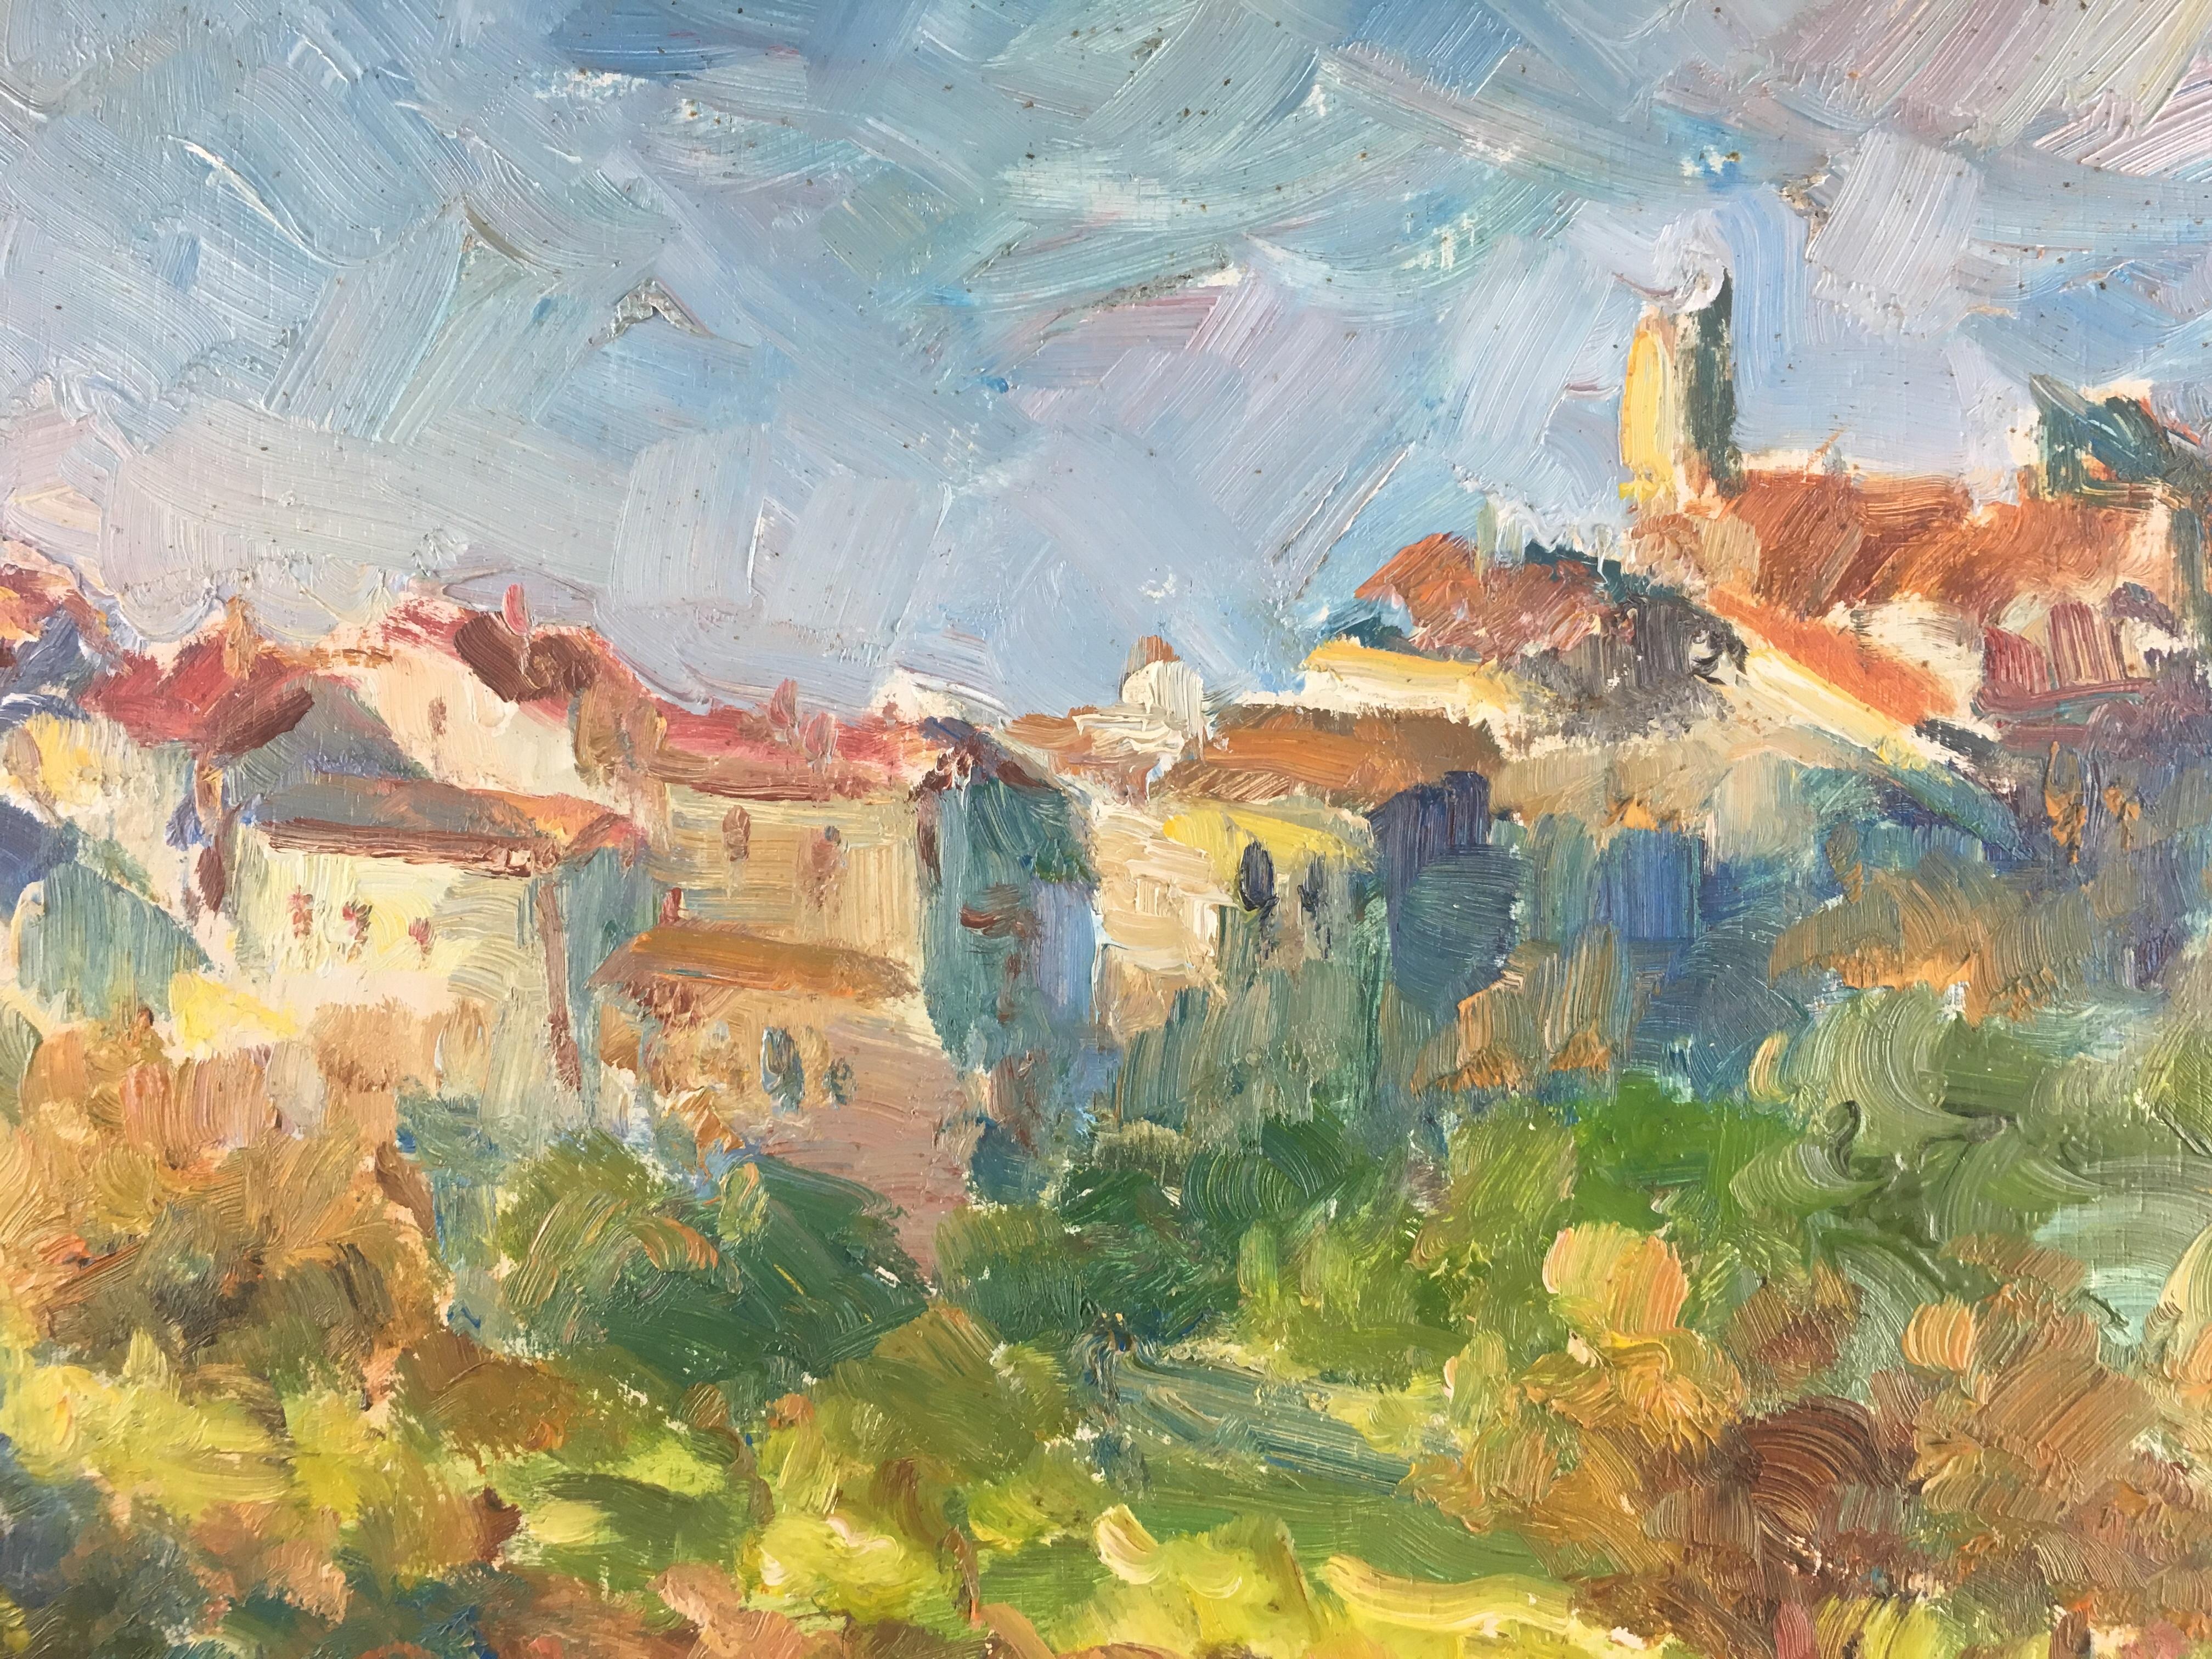 Beautiful original post-impressionist painting on isorel (board) depicting a typical Provençal village.
Very vivid colors just like the scenery in the Provence region in spring and summer.
The artist Victor Ferrari is a very well-known listed